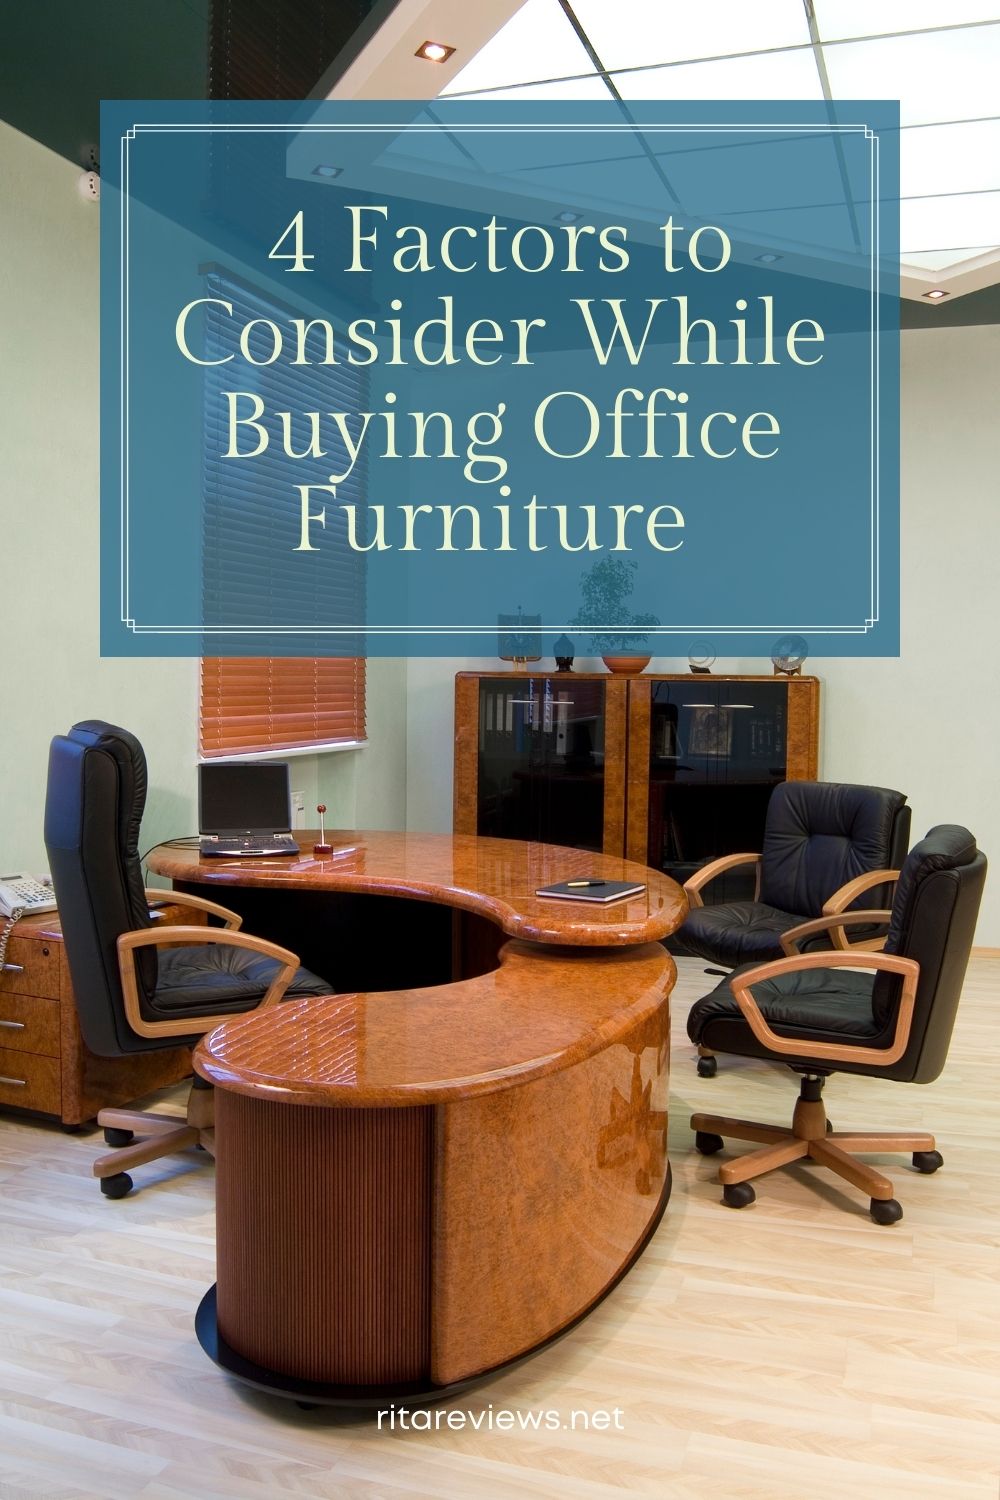 4 Factors to Consider While Buying Office Furniture in Melbourne